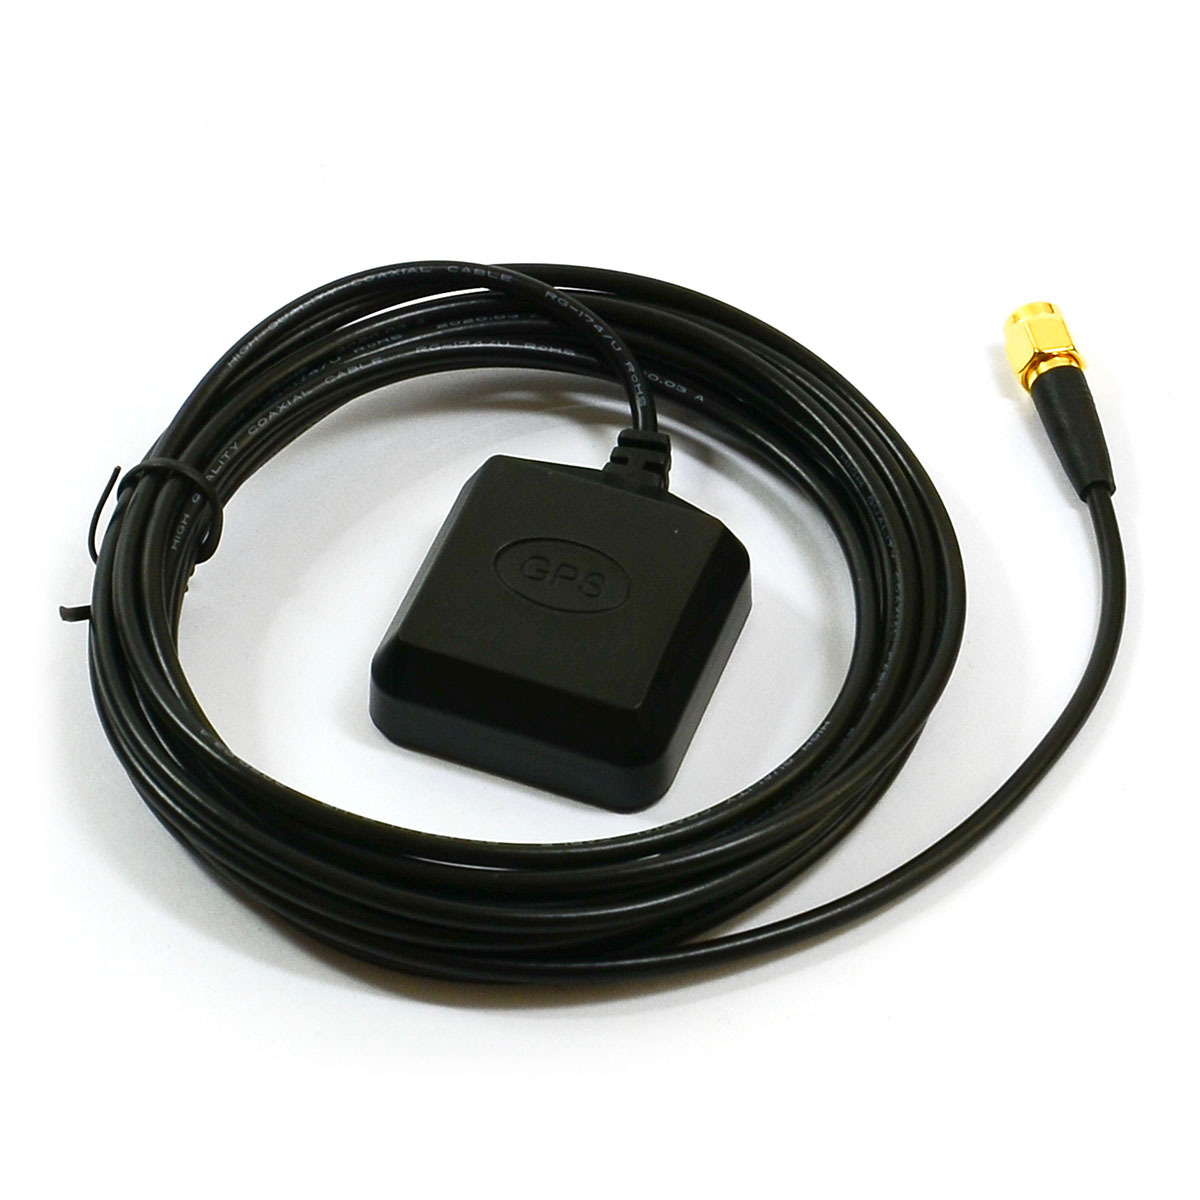 GPS Antenna and Lead Suit SG31650